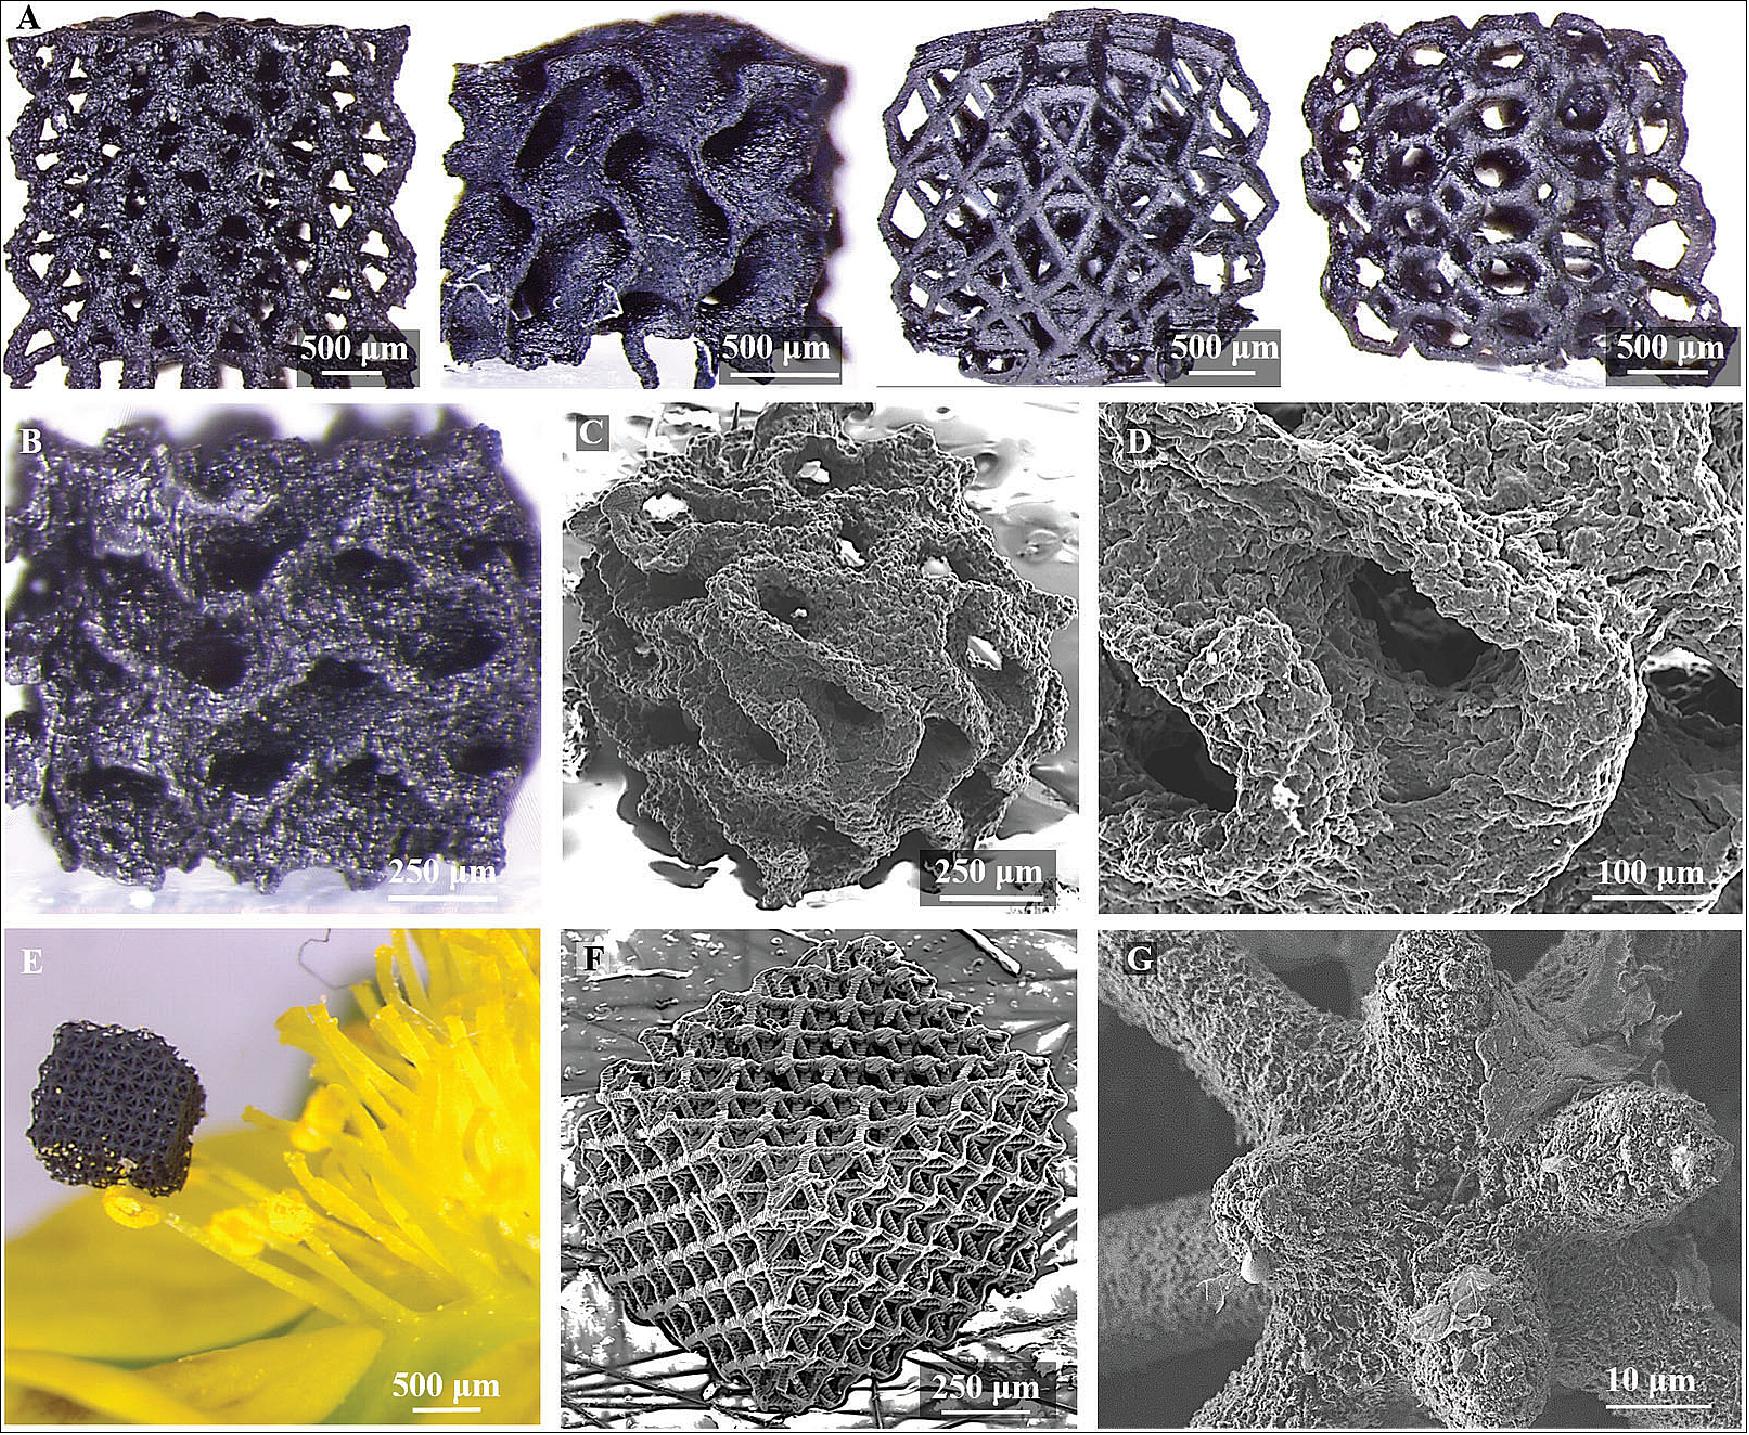 Figure 88: (A) Four ‘‘Green’’ MAG parts of differing unit-cell structures before pyrolysis from left to right octet-truss, gyroid, cubo-octahedron, and Kelvin foam; (B) optical image of pyrolyzed gyroid; (C) SEM image of pyrolyzed gyroid with intricate overhang structures (D) zoomed image of pyrolyzed gyroid in ‘‘C’’; (E) optical image of pyrolyzed MAG octet-truss, of a different design than shown in ‘‘A’’ supported by a single strawberry blossom filament; (F) SEM image of pyrolyzed octet-truss MAG in ‘‘E’’; (G) zoomed image of octet-truss in ‘‘E’’ showing the very high 10 µm resolution achievable in our process (image credit: 3D print graphene study team of Virginia Tech and Lawrence Livermore National Laboratory)